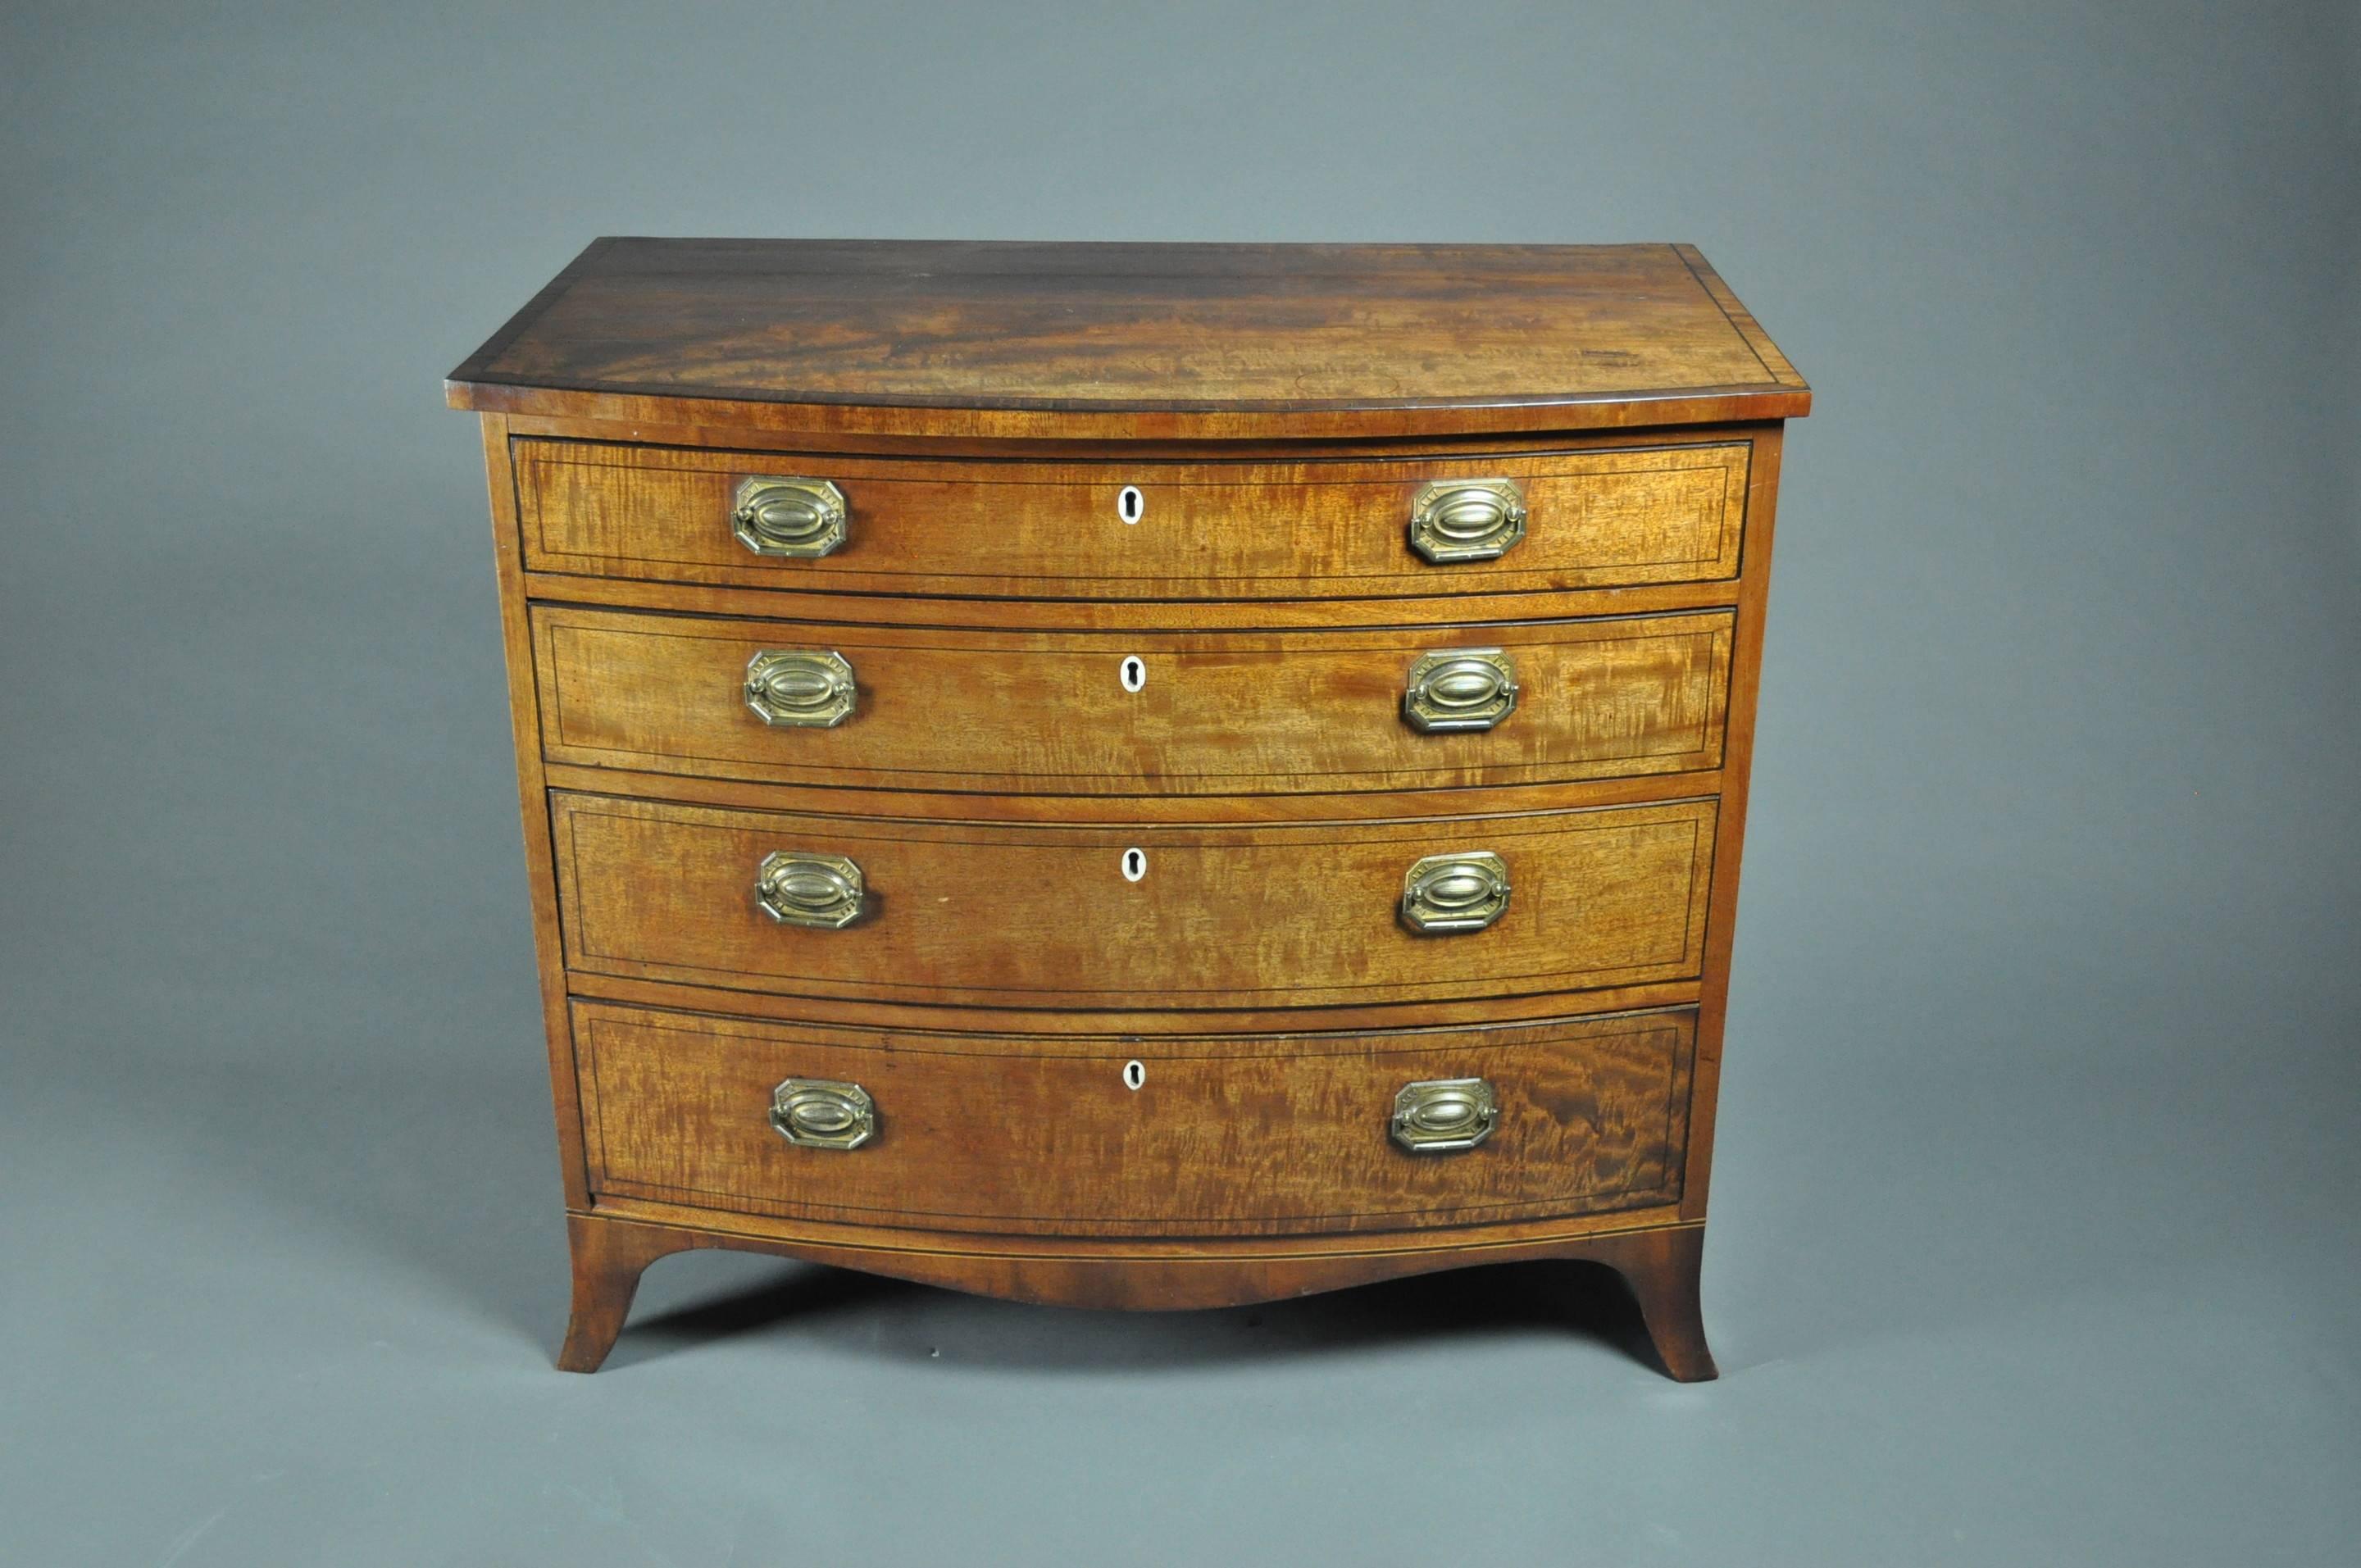 A good early 19th century mahogany bow-fronted chest of four graduated drawers, inlaid with boxwood and ebonized stringing and standing on splayed bracket feet with shaped apron. 
Original handles and excellent color.